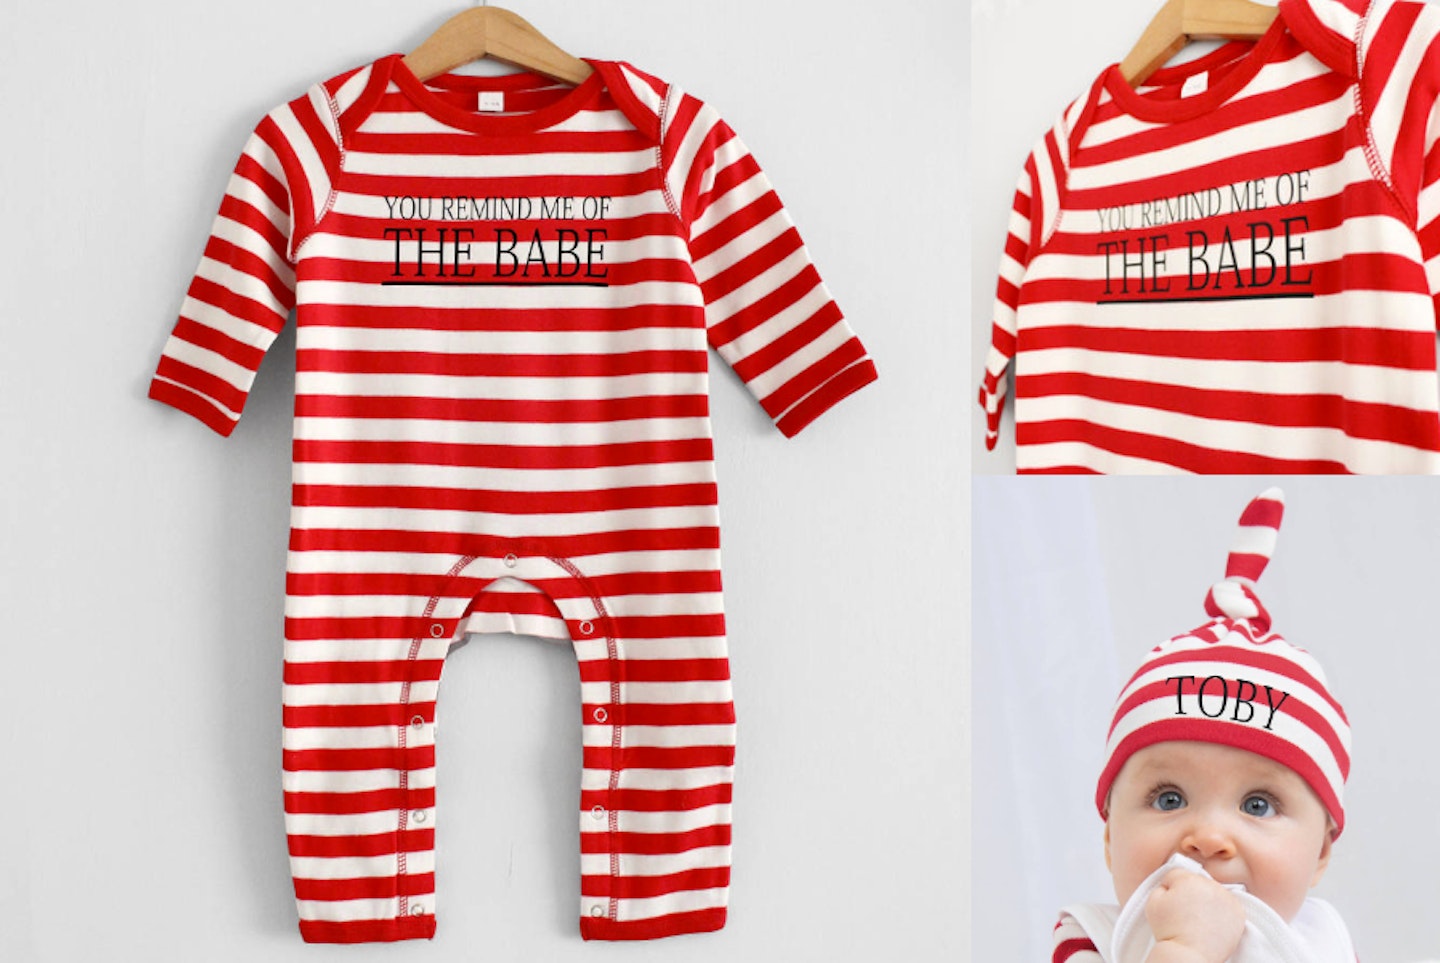 'You Remind Me Of The Babe' Stripy Romper